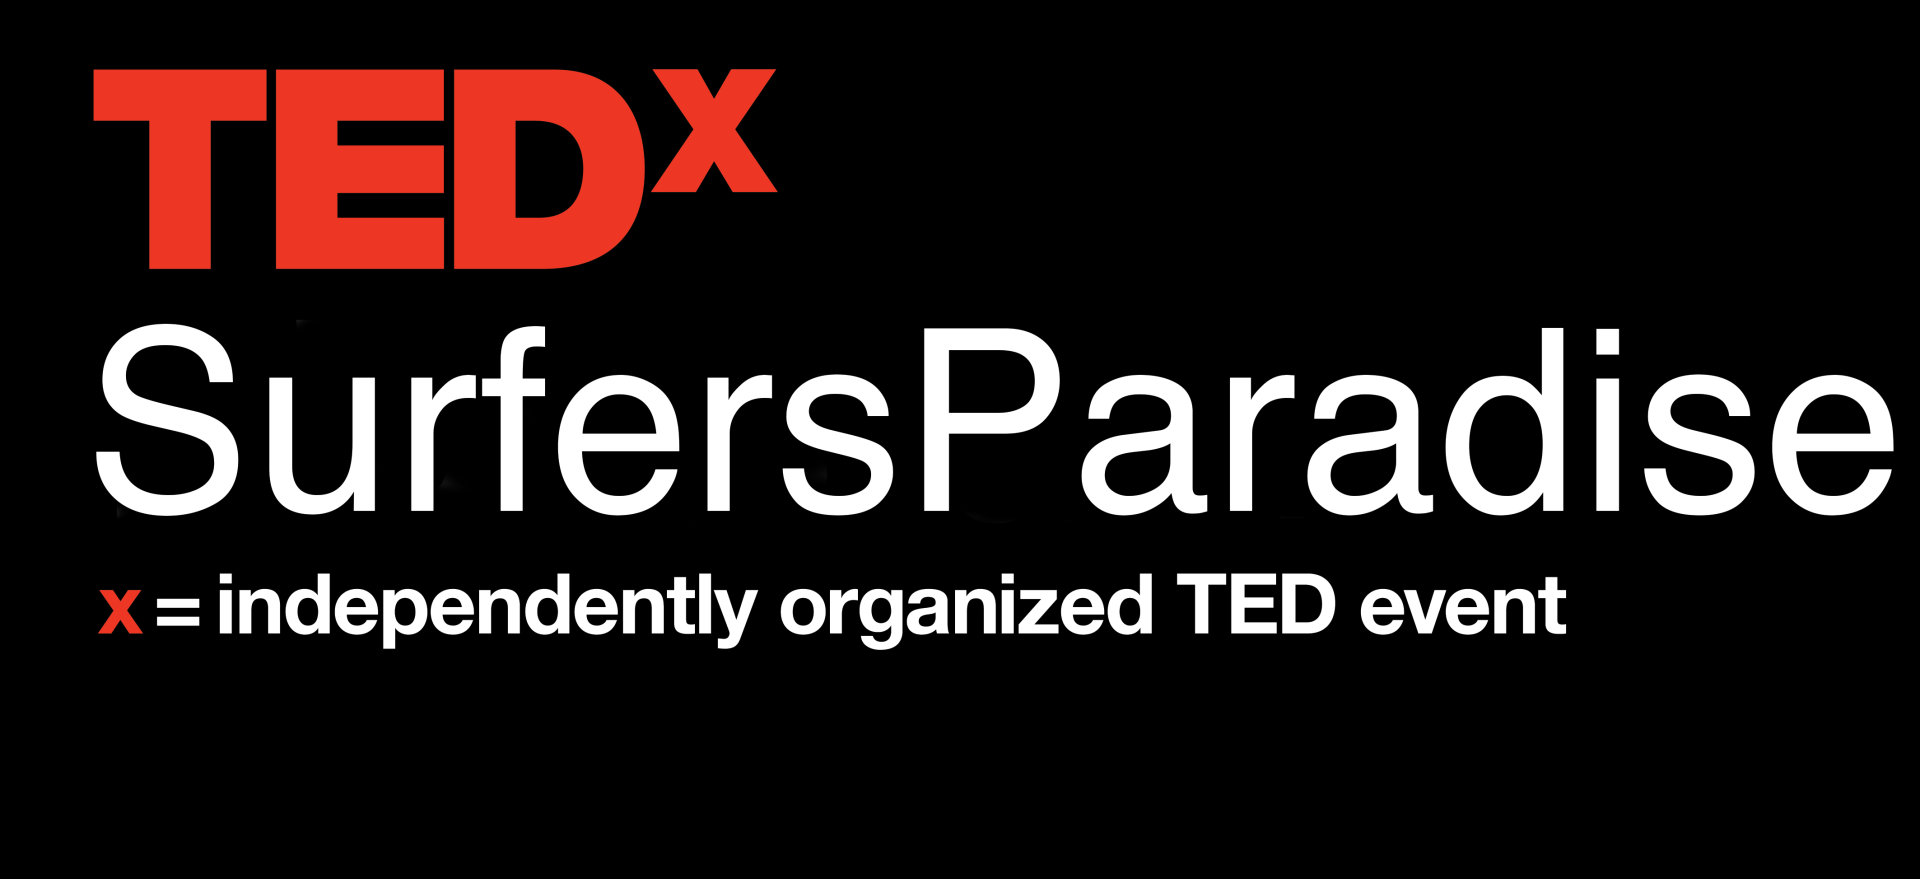 Conferences & Live Events Through TED x Surfers Paradise